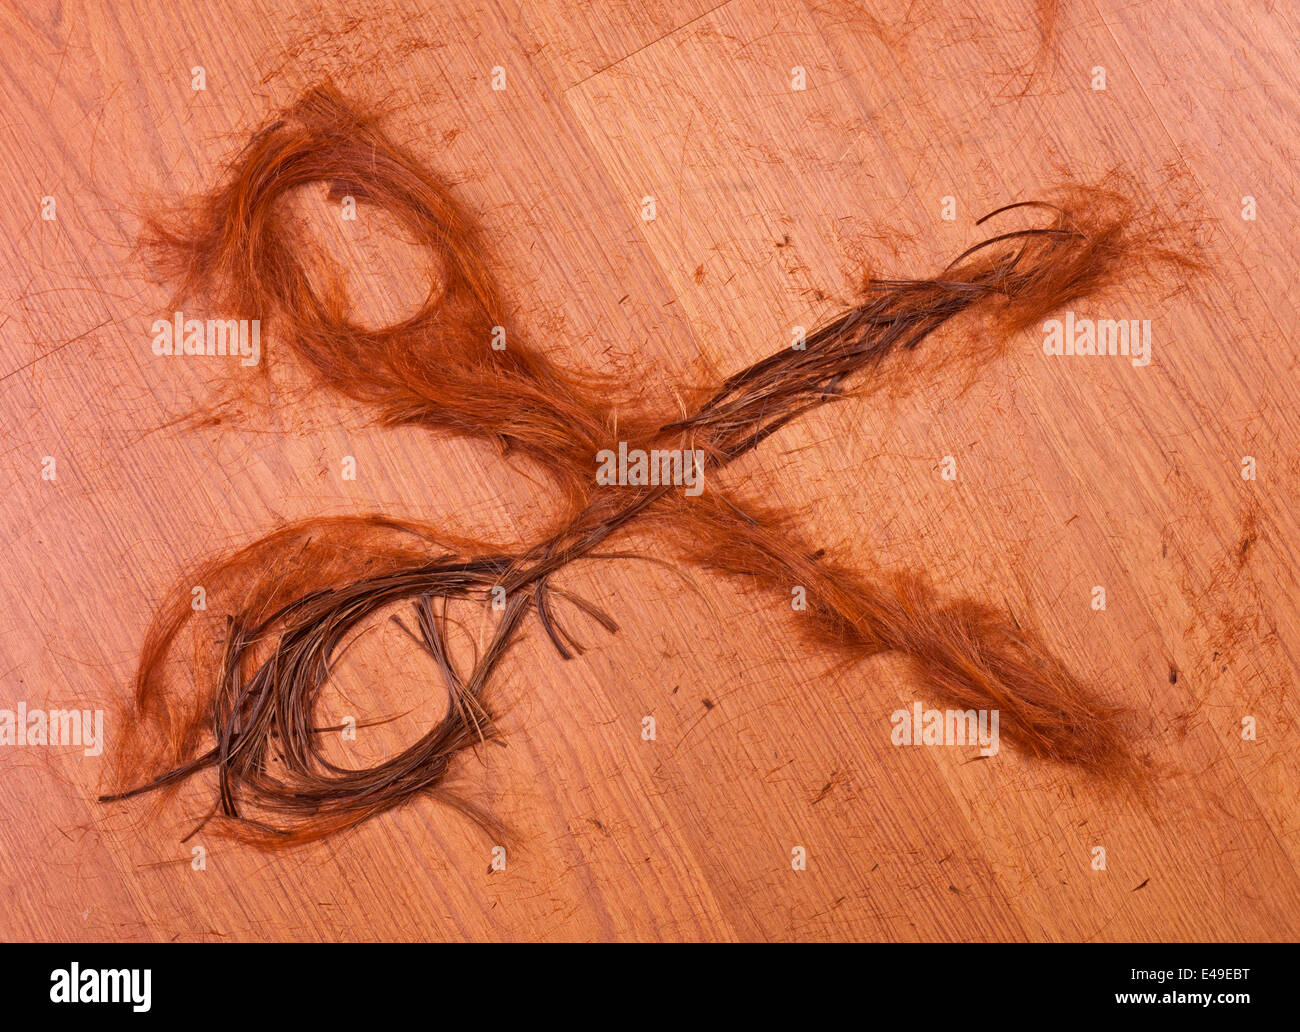 cropped hair in the form of scissors on wooden background Stock Photo